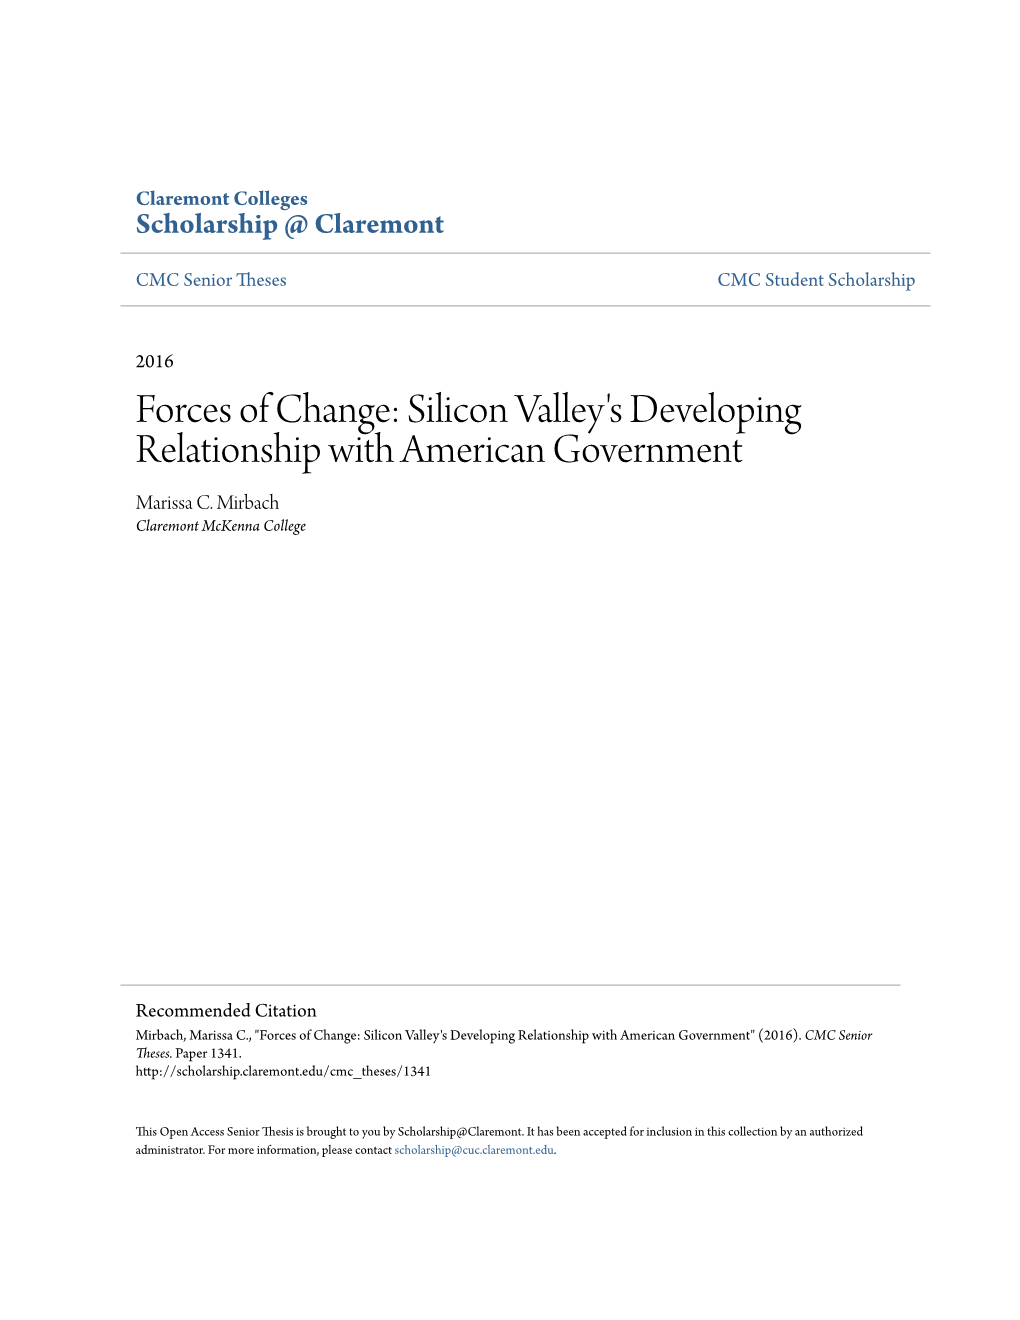 Silicon Valley's Developing Relationship with American Government Marissa C